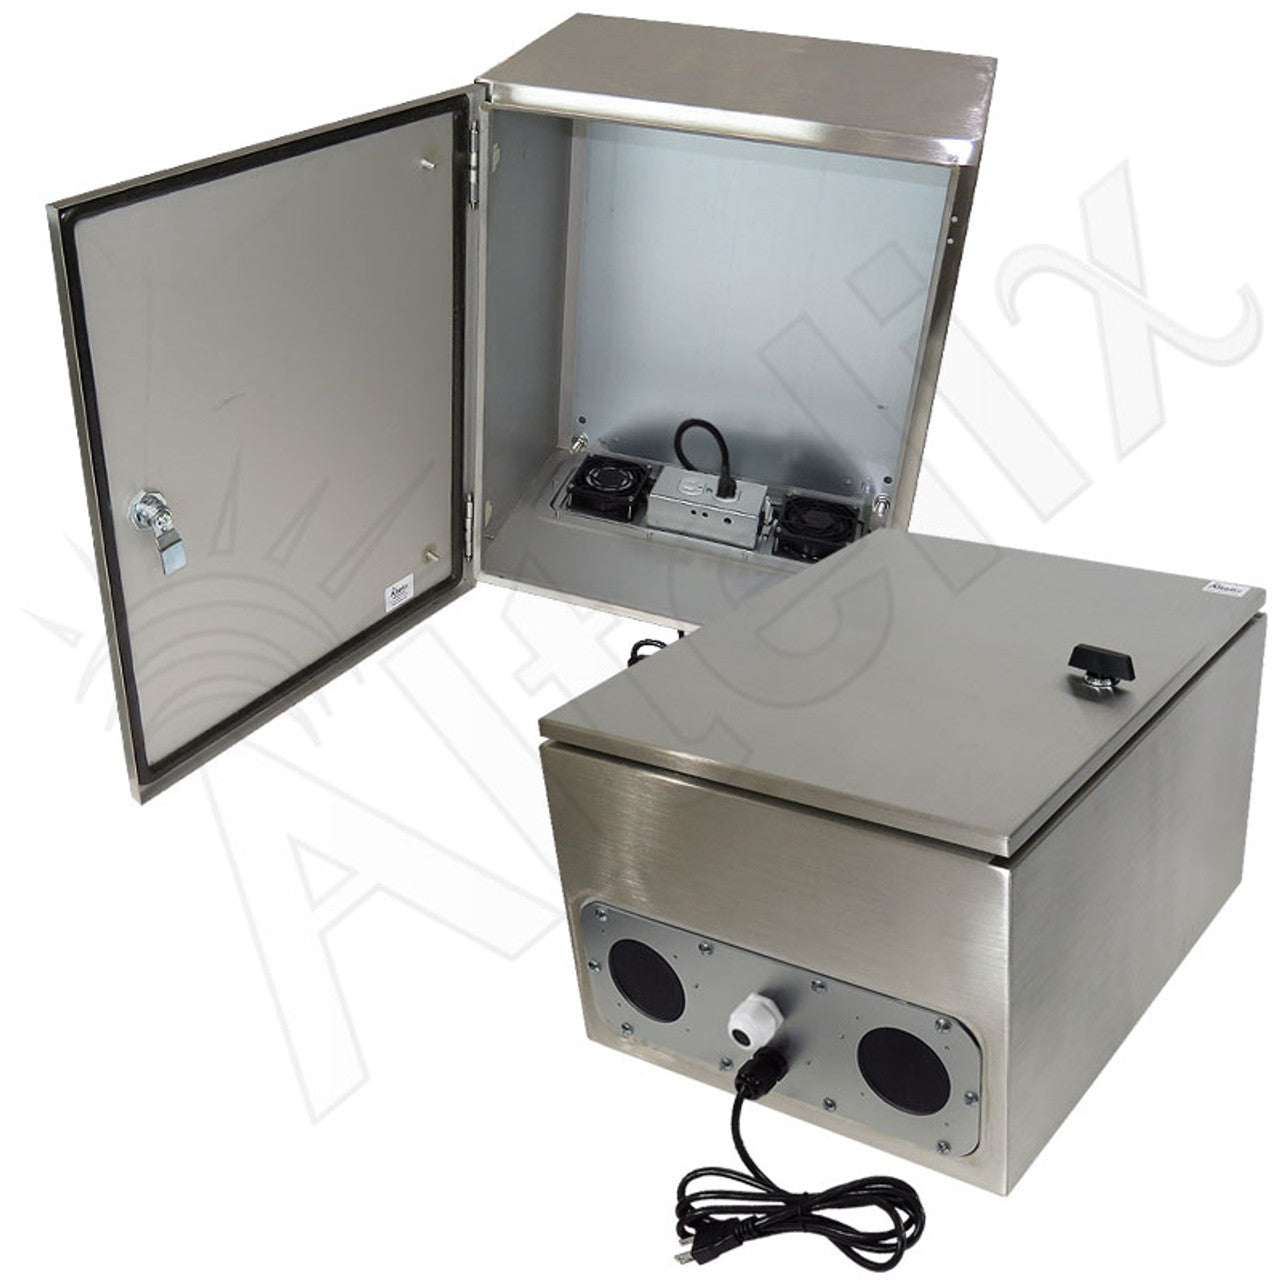 Altelix Stainless Steel Heated Weatherproof NEMA Enclosure with Dual Cooling Fans, 200W Heater, 120 VAC Outlets and Power Cord-3